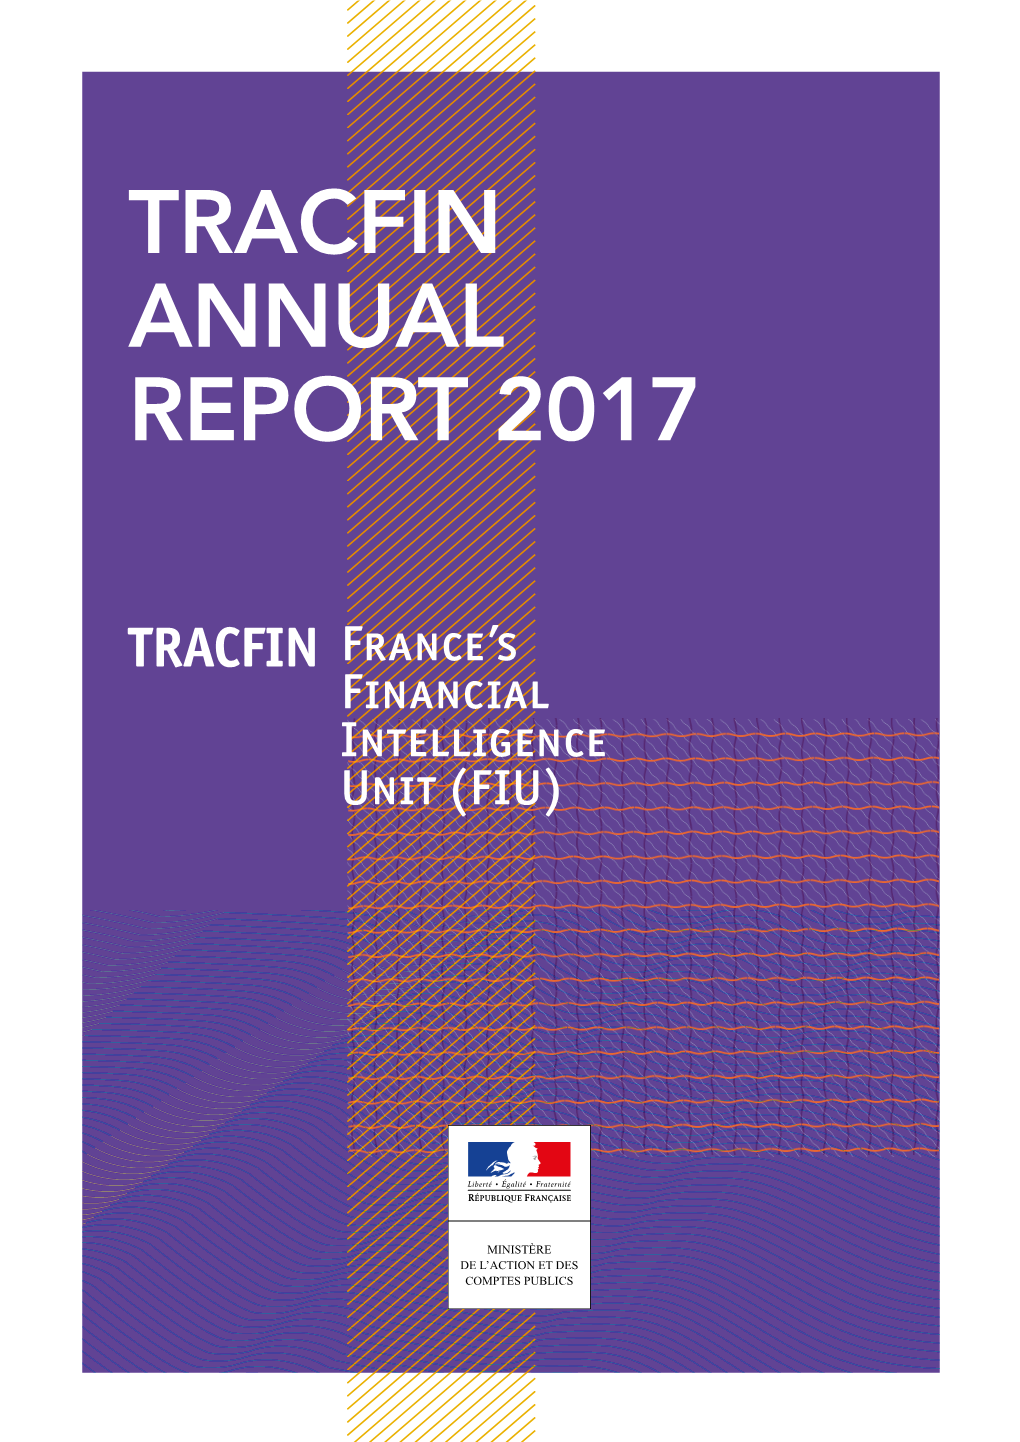 TRACFIN ANNUAL REPORT 2017 Tracfin France’S Financial Intelligence Unit (FIU)